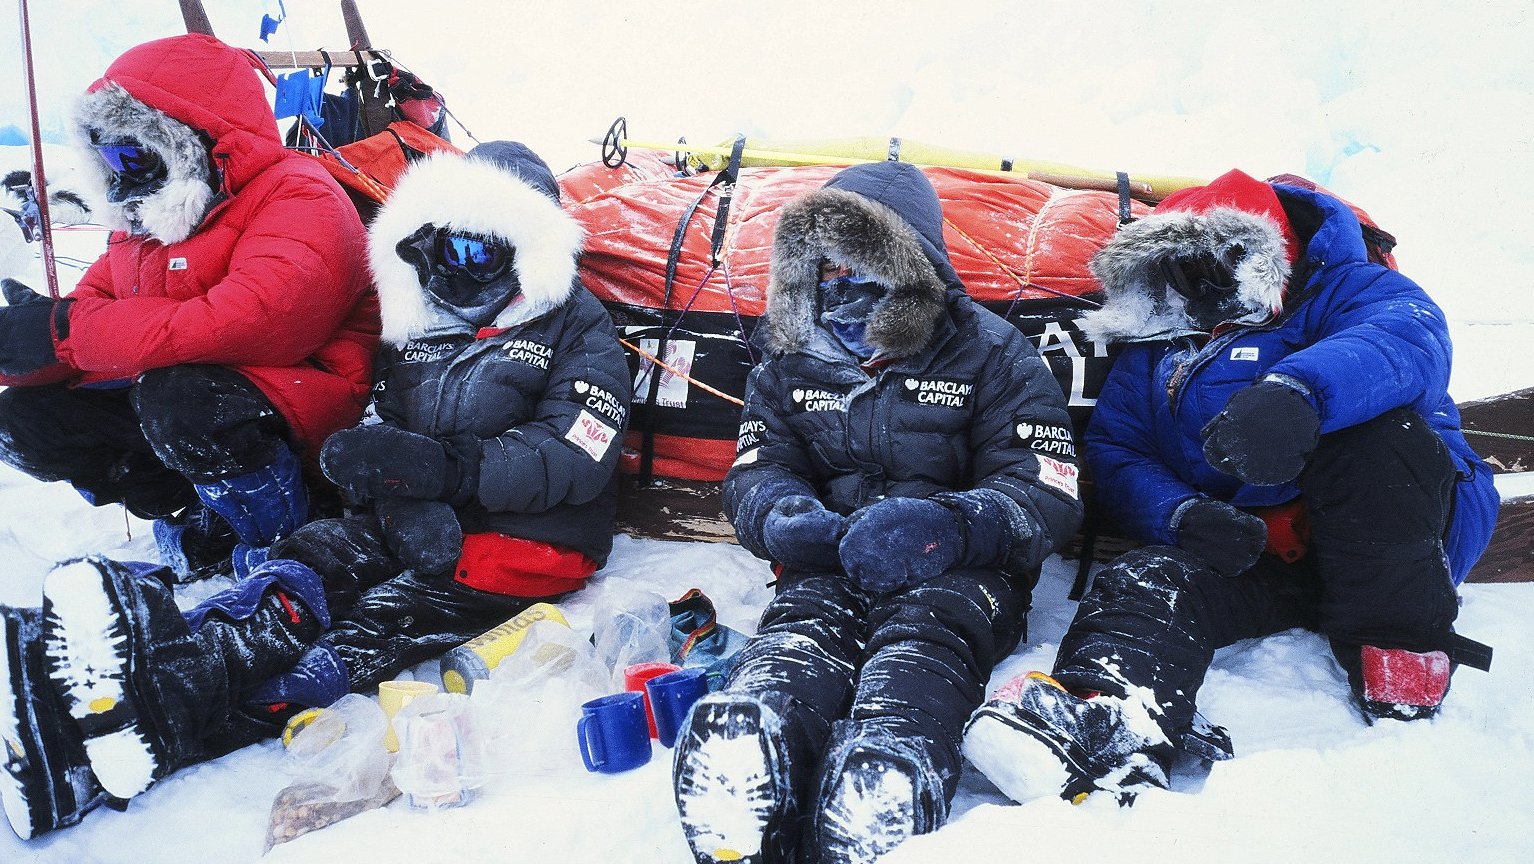 North Pole Expeditions